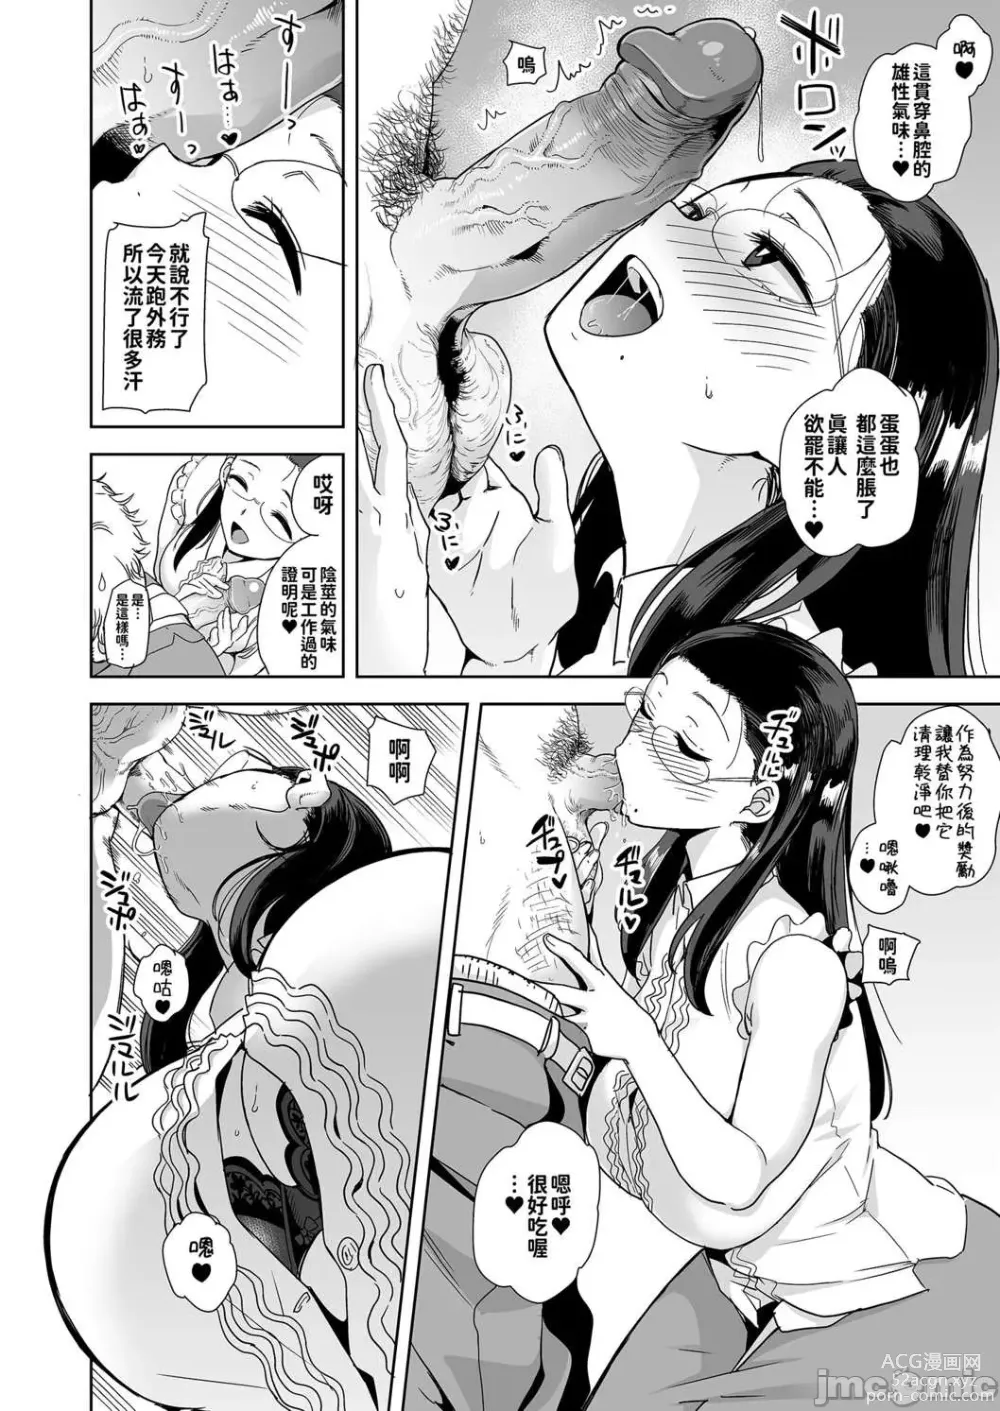 Page 8 of doujinshi 聖華女学院高等部公認竿おじさん 1